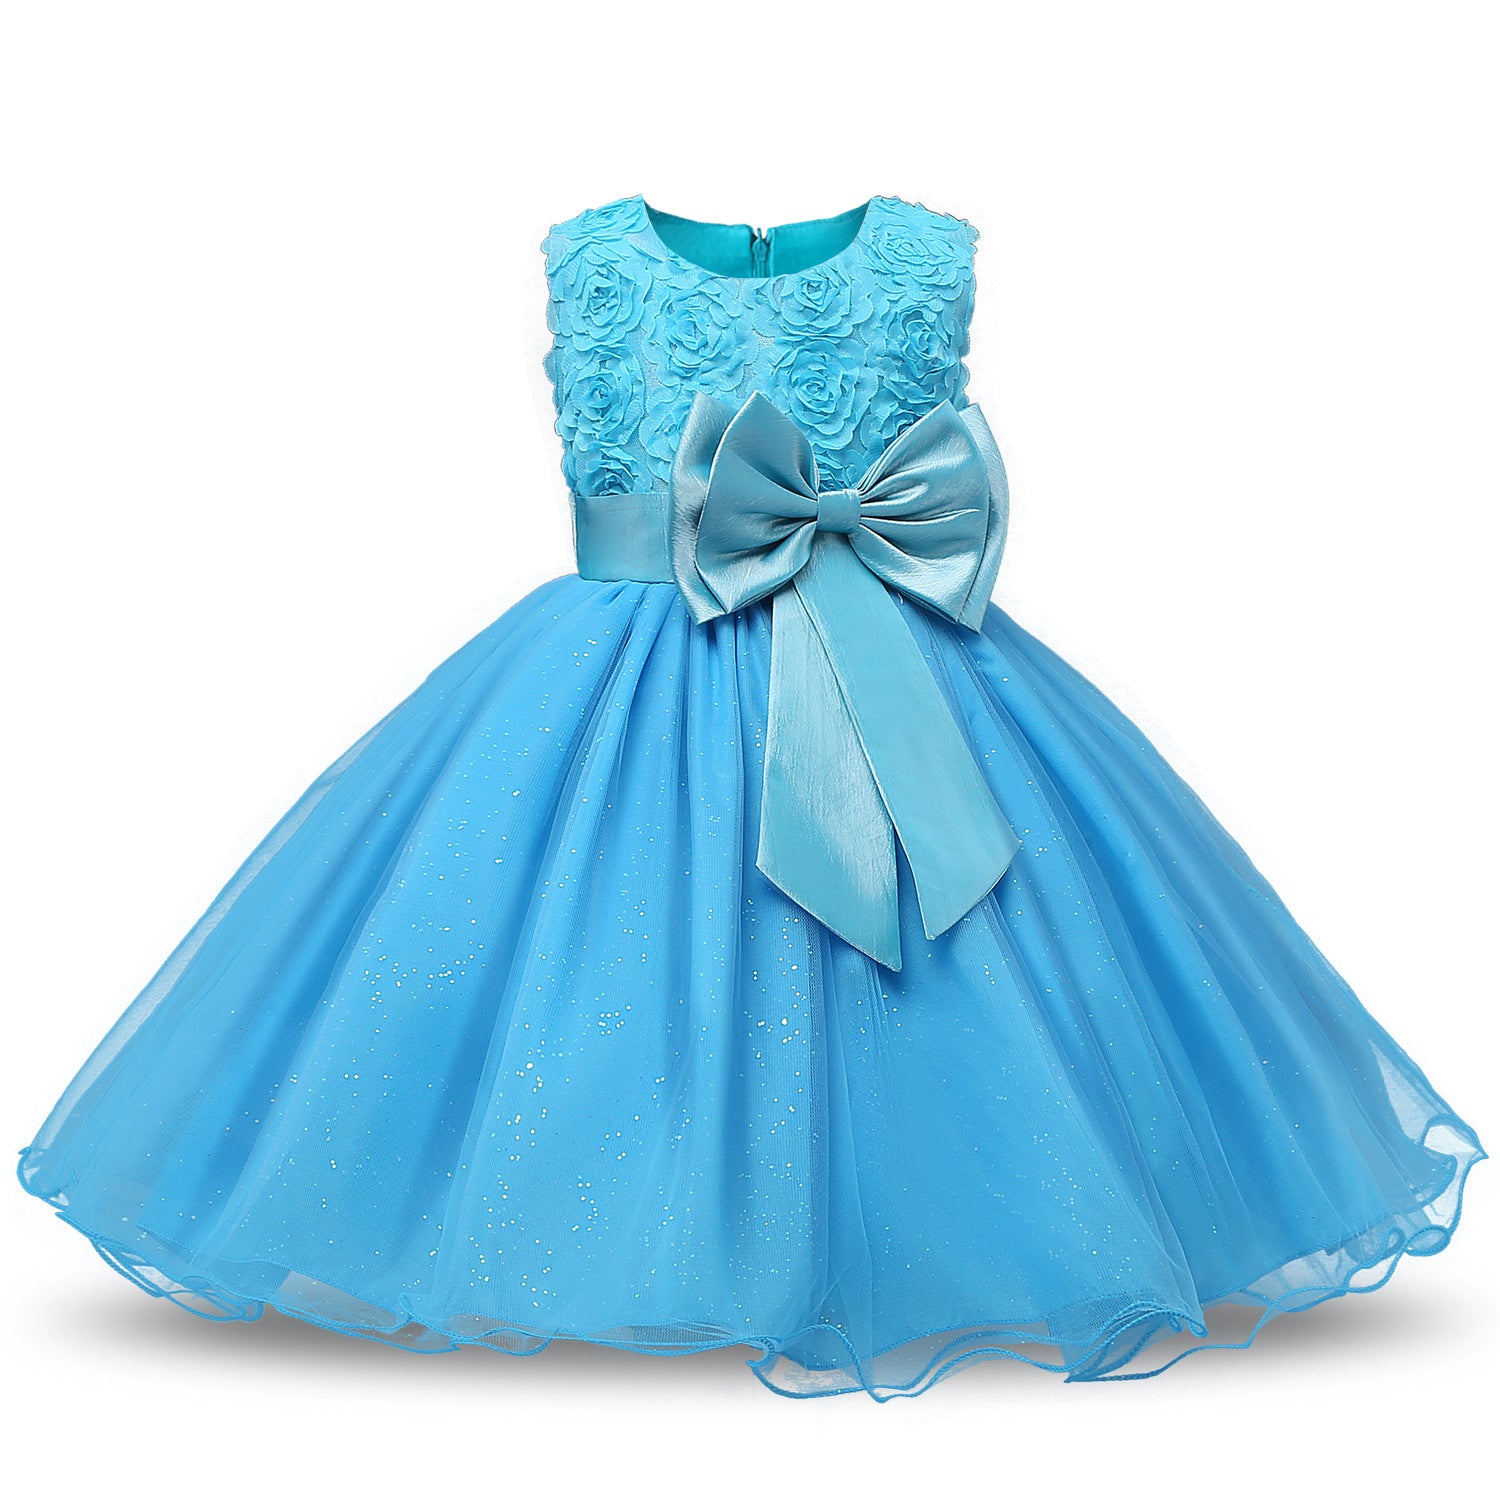 Multi-colors Flower Girl Dresses Sleeveless A Line Ball Gown with Bows